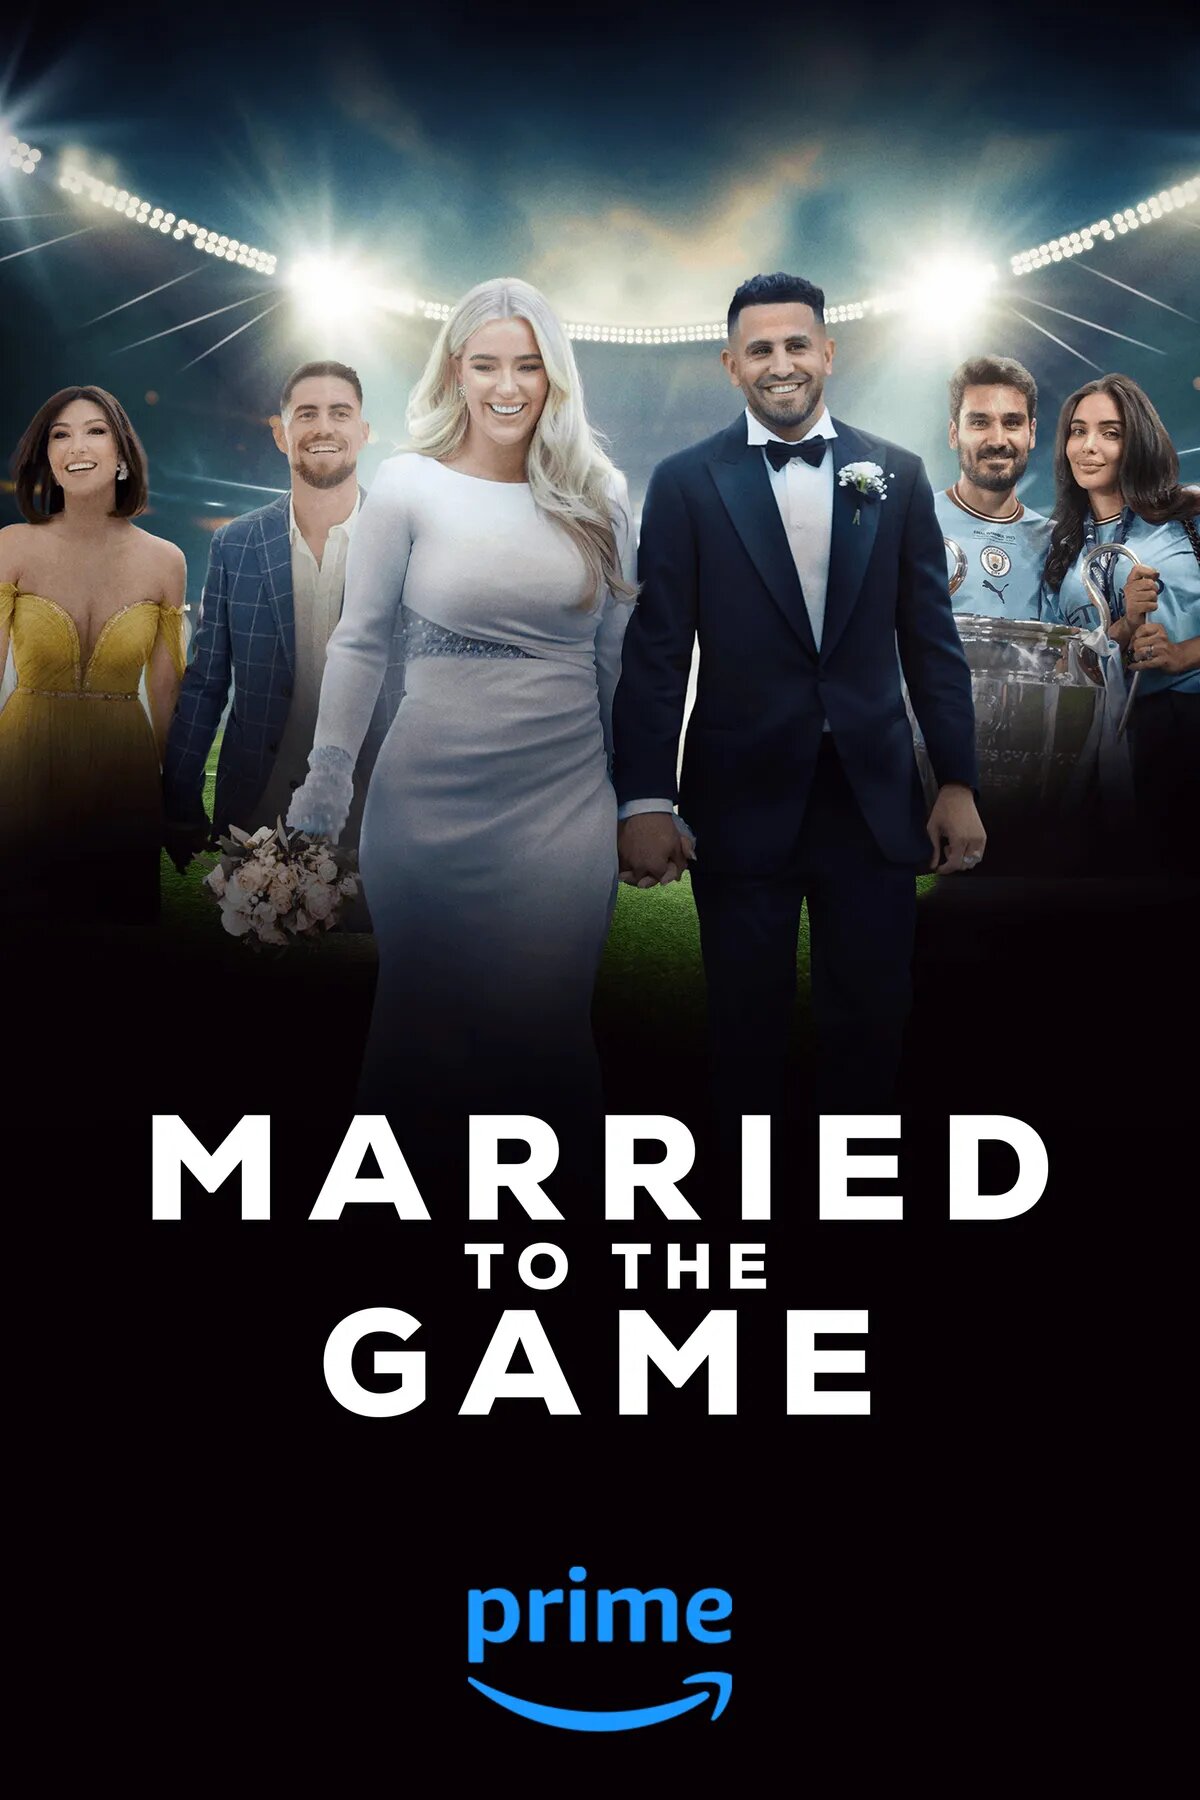 Married to the Game ne zaman